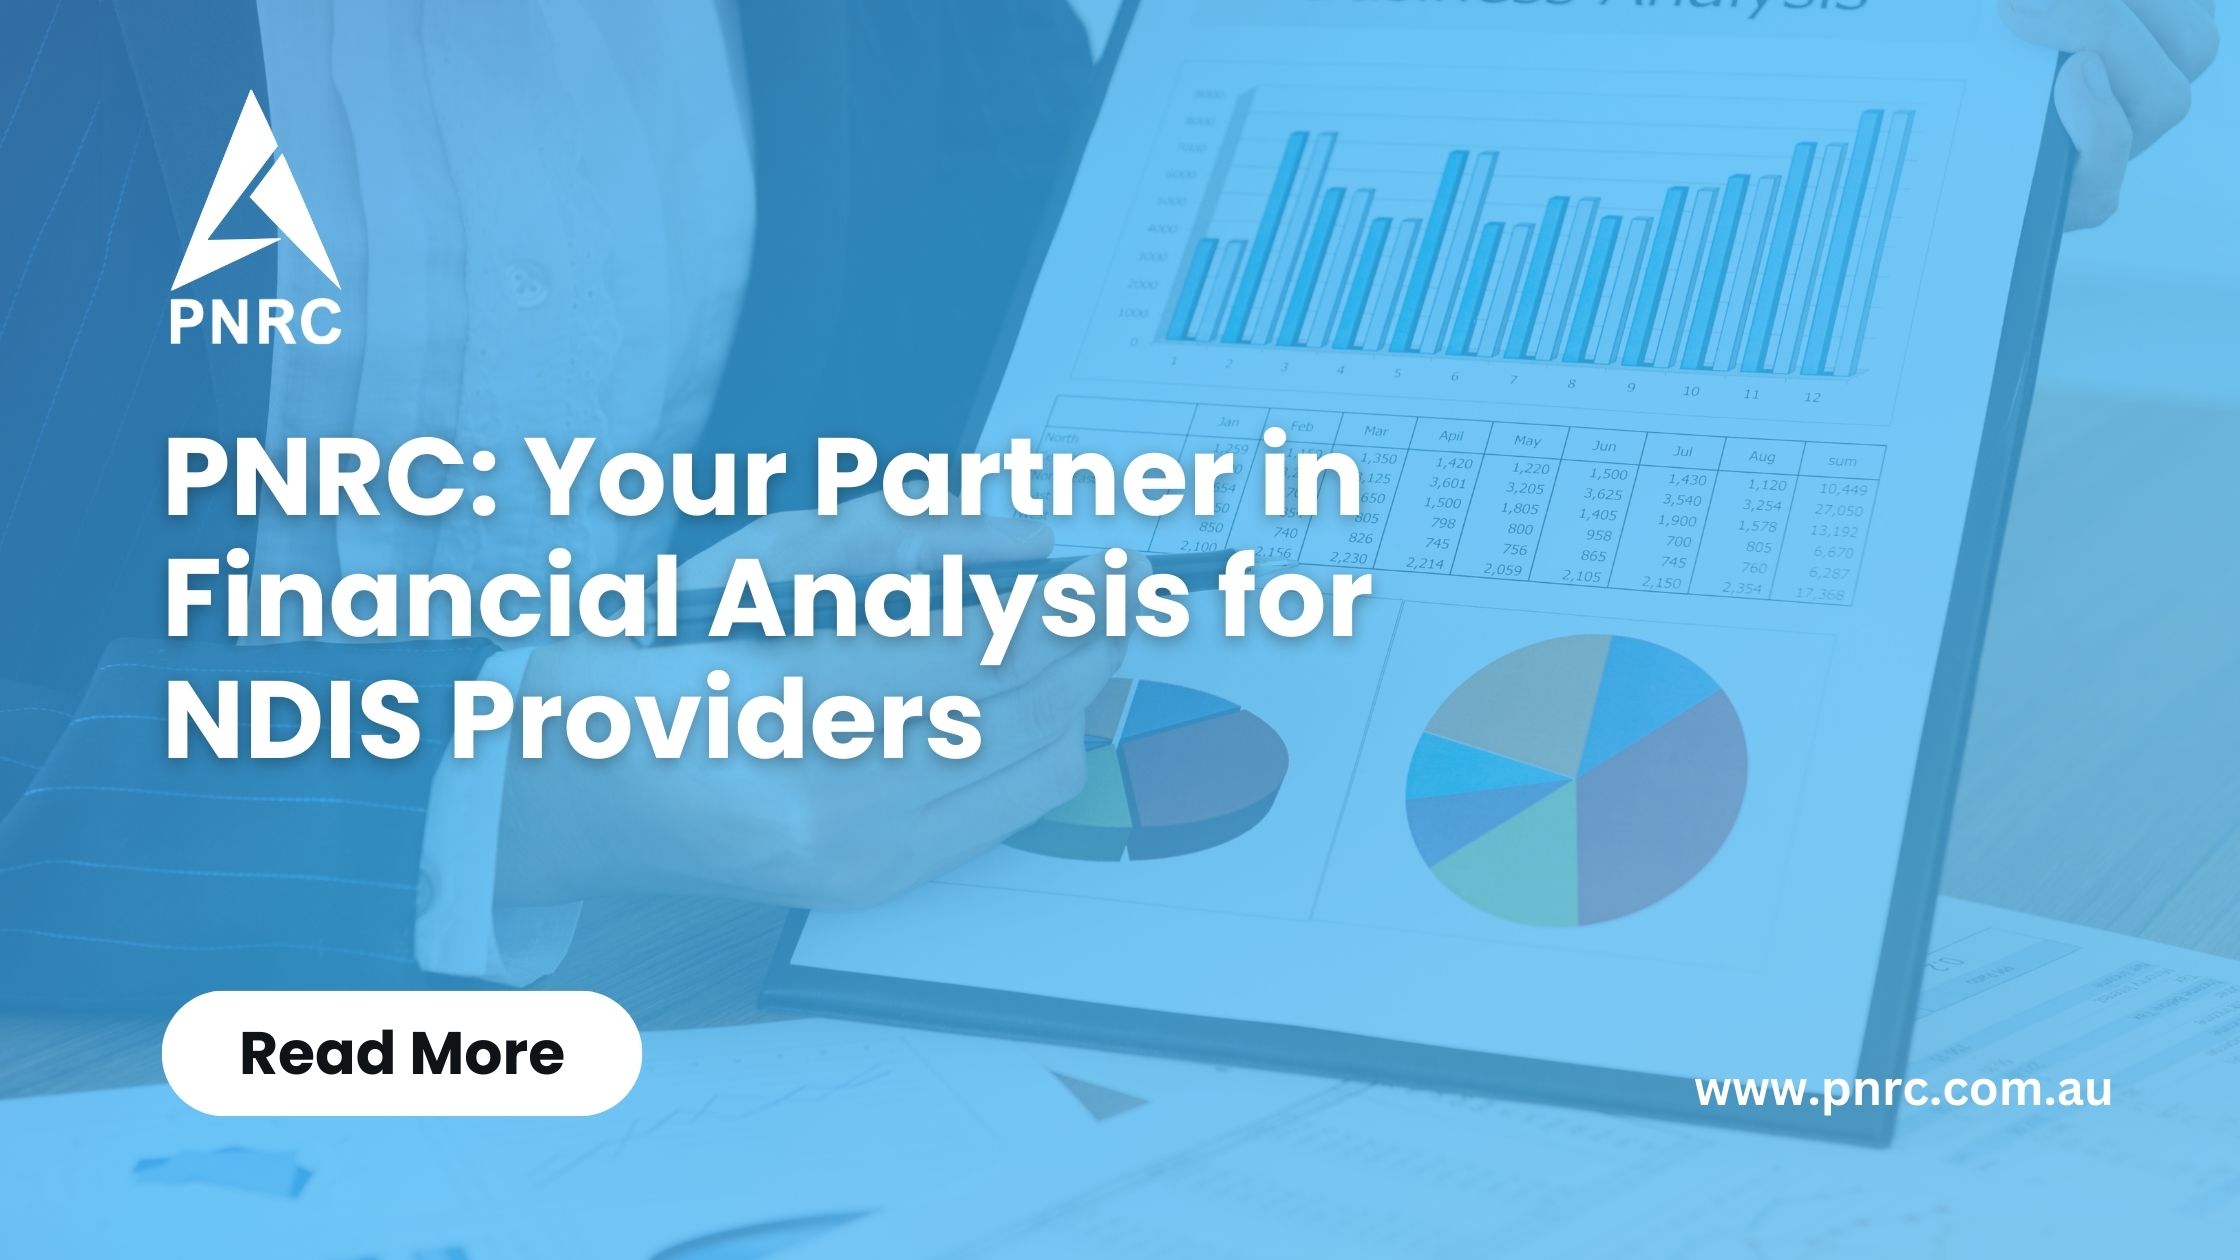 PNRC: Your Partner in Financial Analysis for NDIS Providers